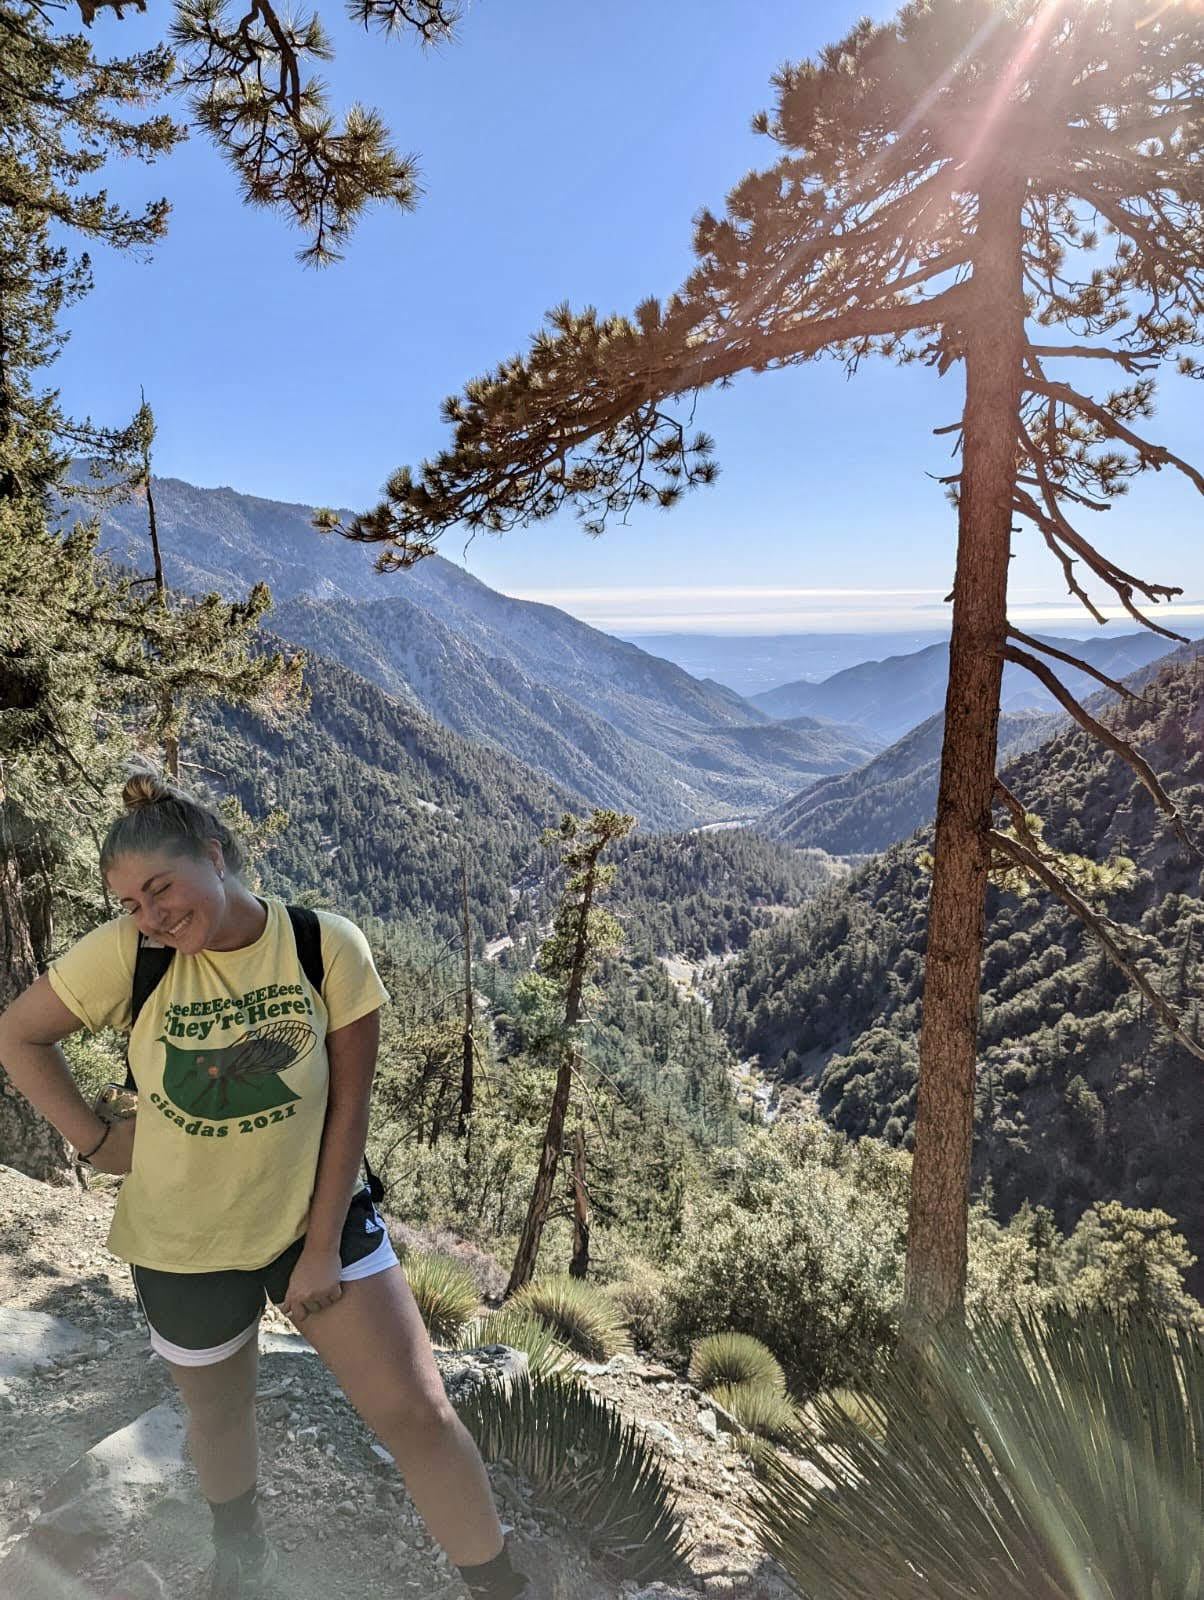 Sara in a yellow shirt and black shorts standing on a rocky ledge overlooking mountain covered in green trees